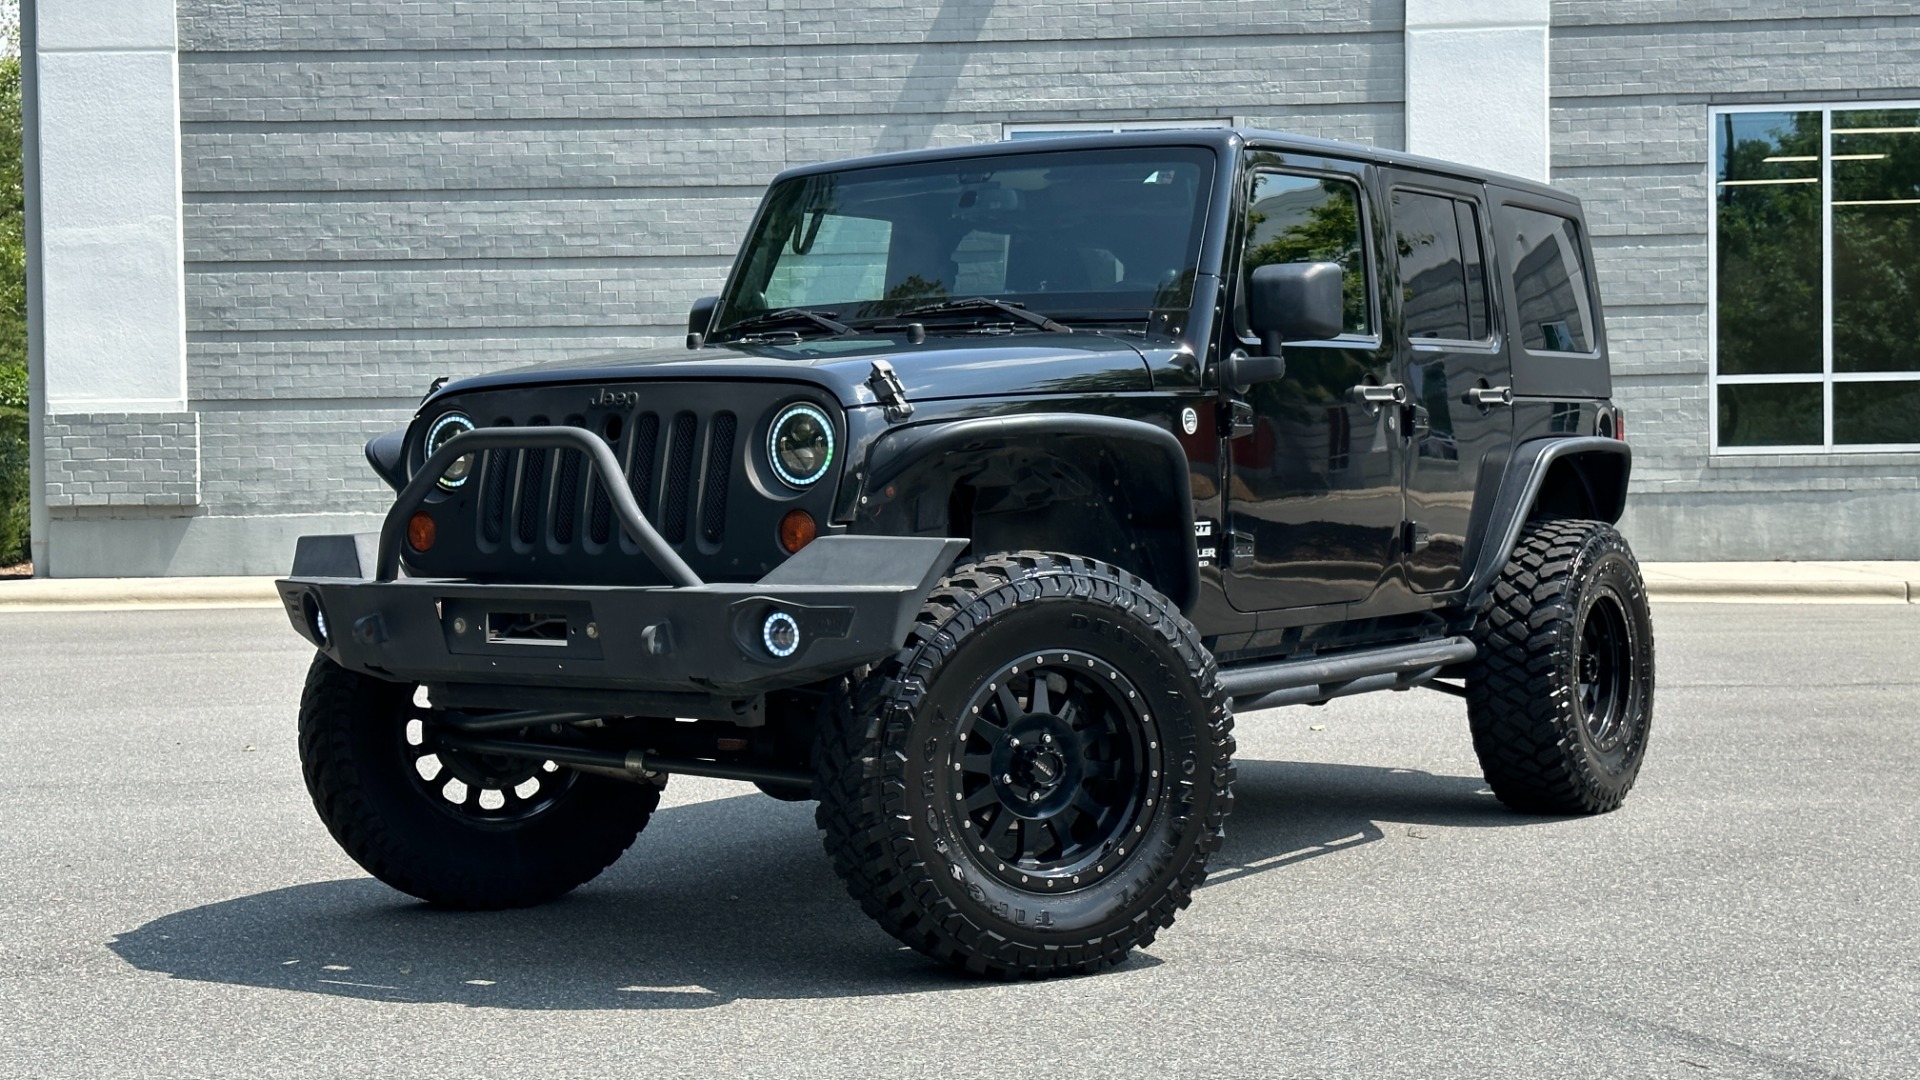 Used 2013 Jeep Wrangler Unlimited Sport / FOX SHOCKS / SOUND SYSTEM / TOUCHSCREEN / SUBWOOFER / TERRAFLEX SUS for sale $24,999 at Formula Imports in Charlotte NC 28227 1